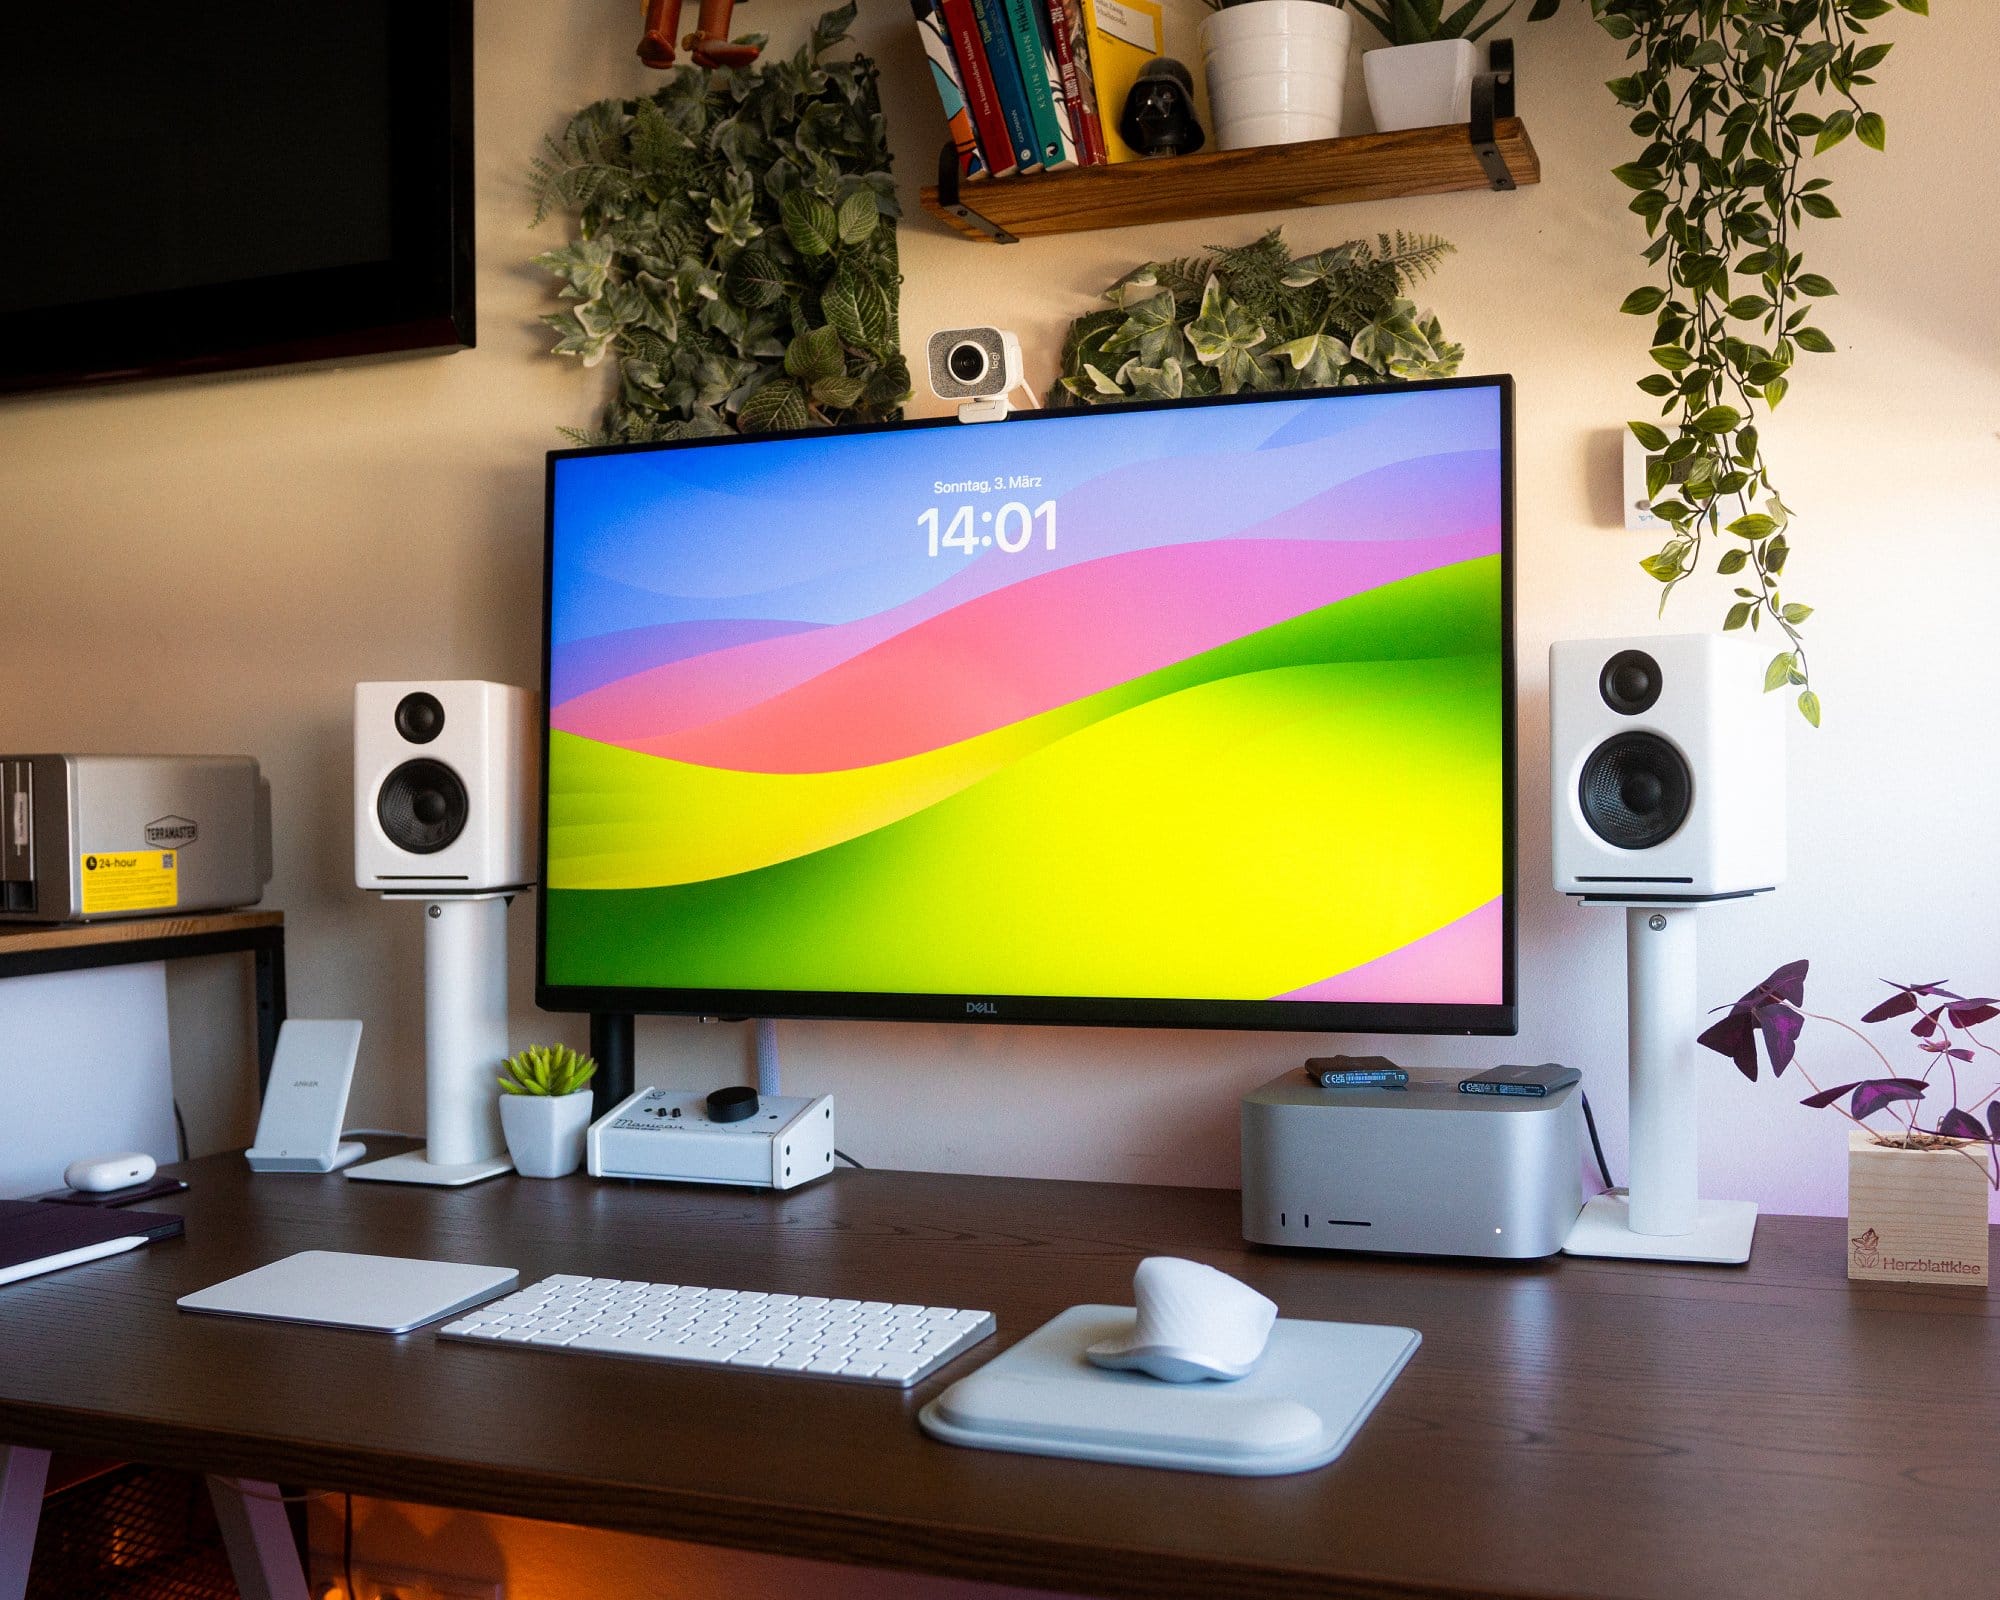 An organised desk featuring a computer monitor with a colourful screen, speakers, and tech accessories, flanked by vibrant houseplants and a wall-mounted TV